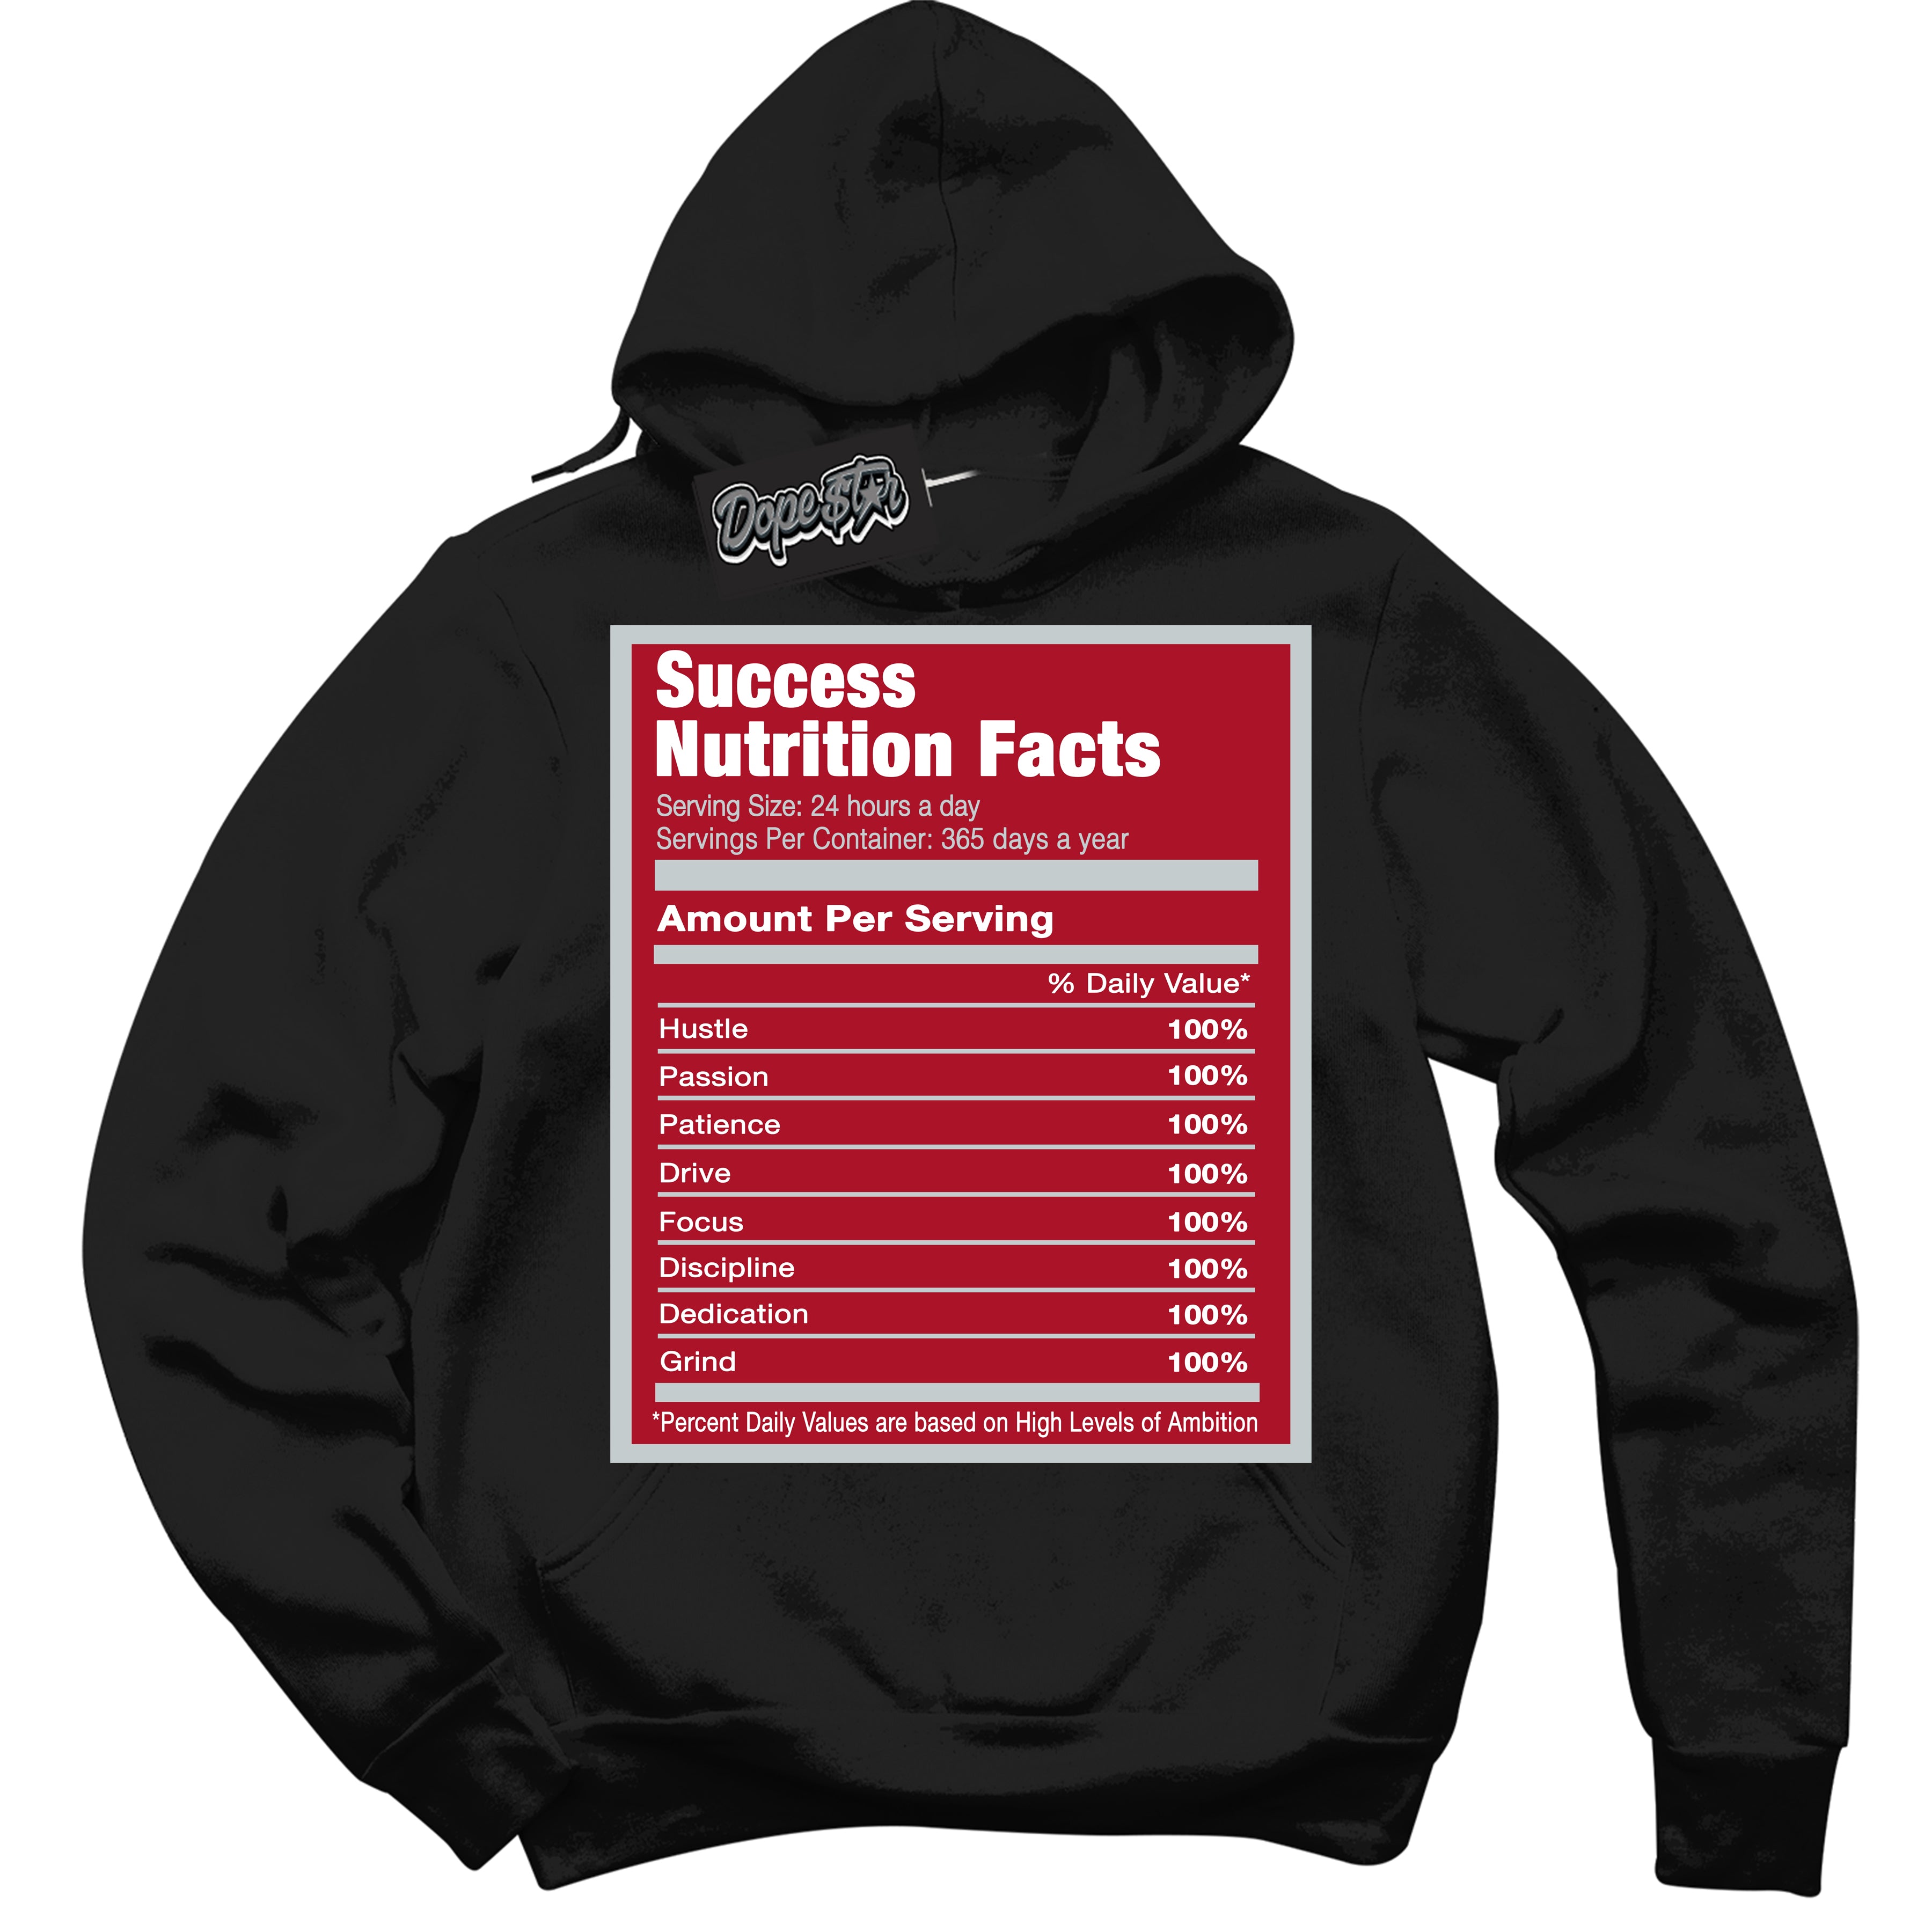 Cool Black Hoodie with “ Success Nutrition ”  design that Perfectly Matches  Reverse Ultraman Sneakers.